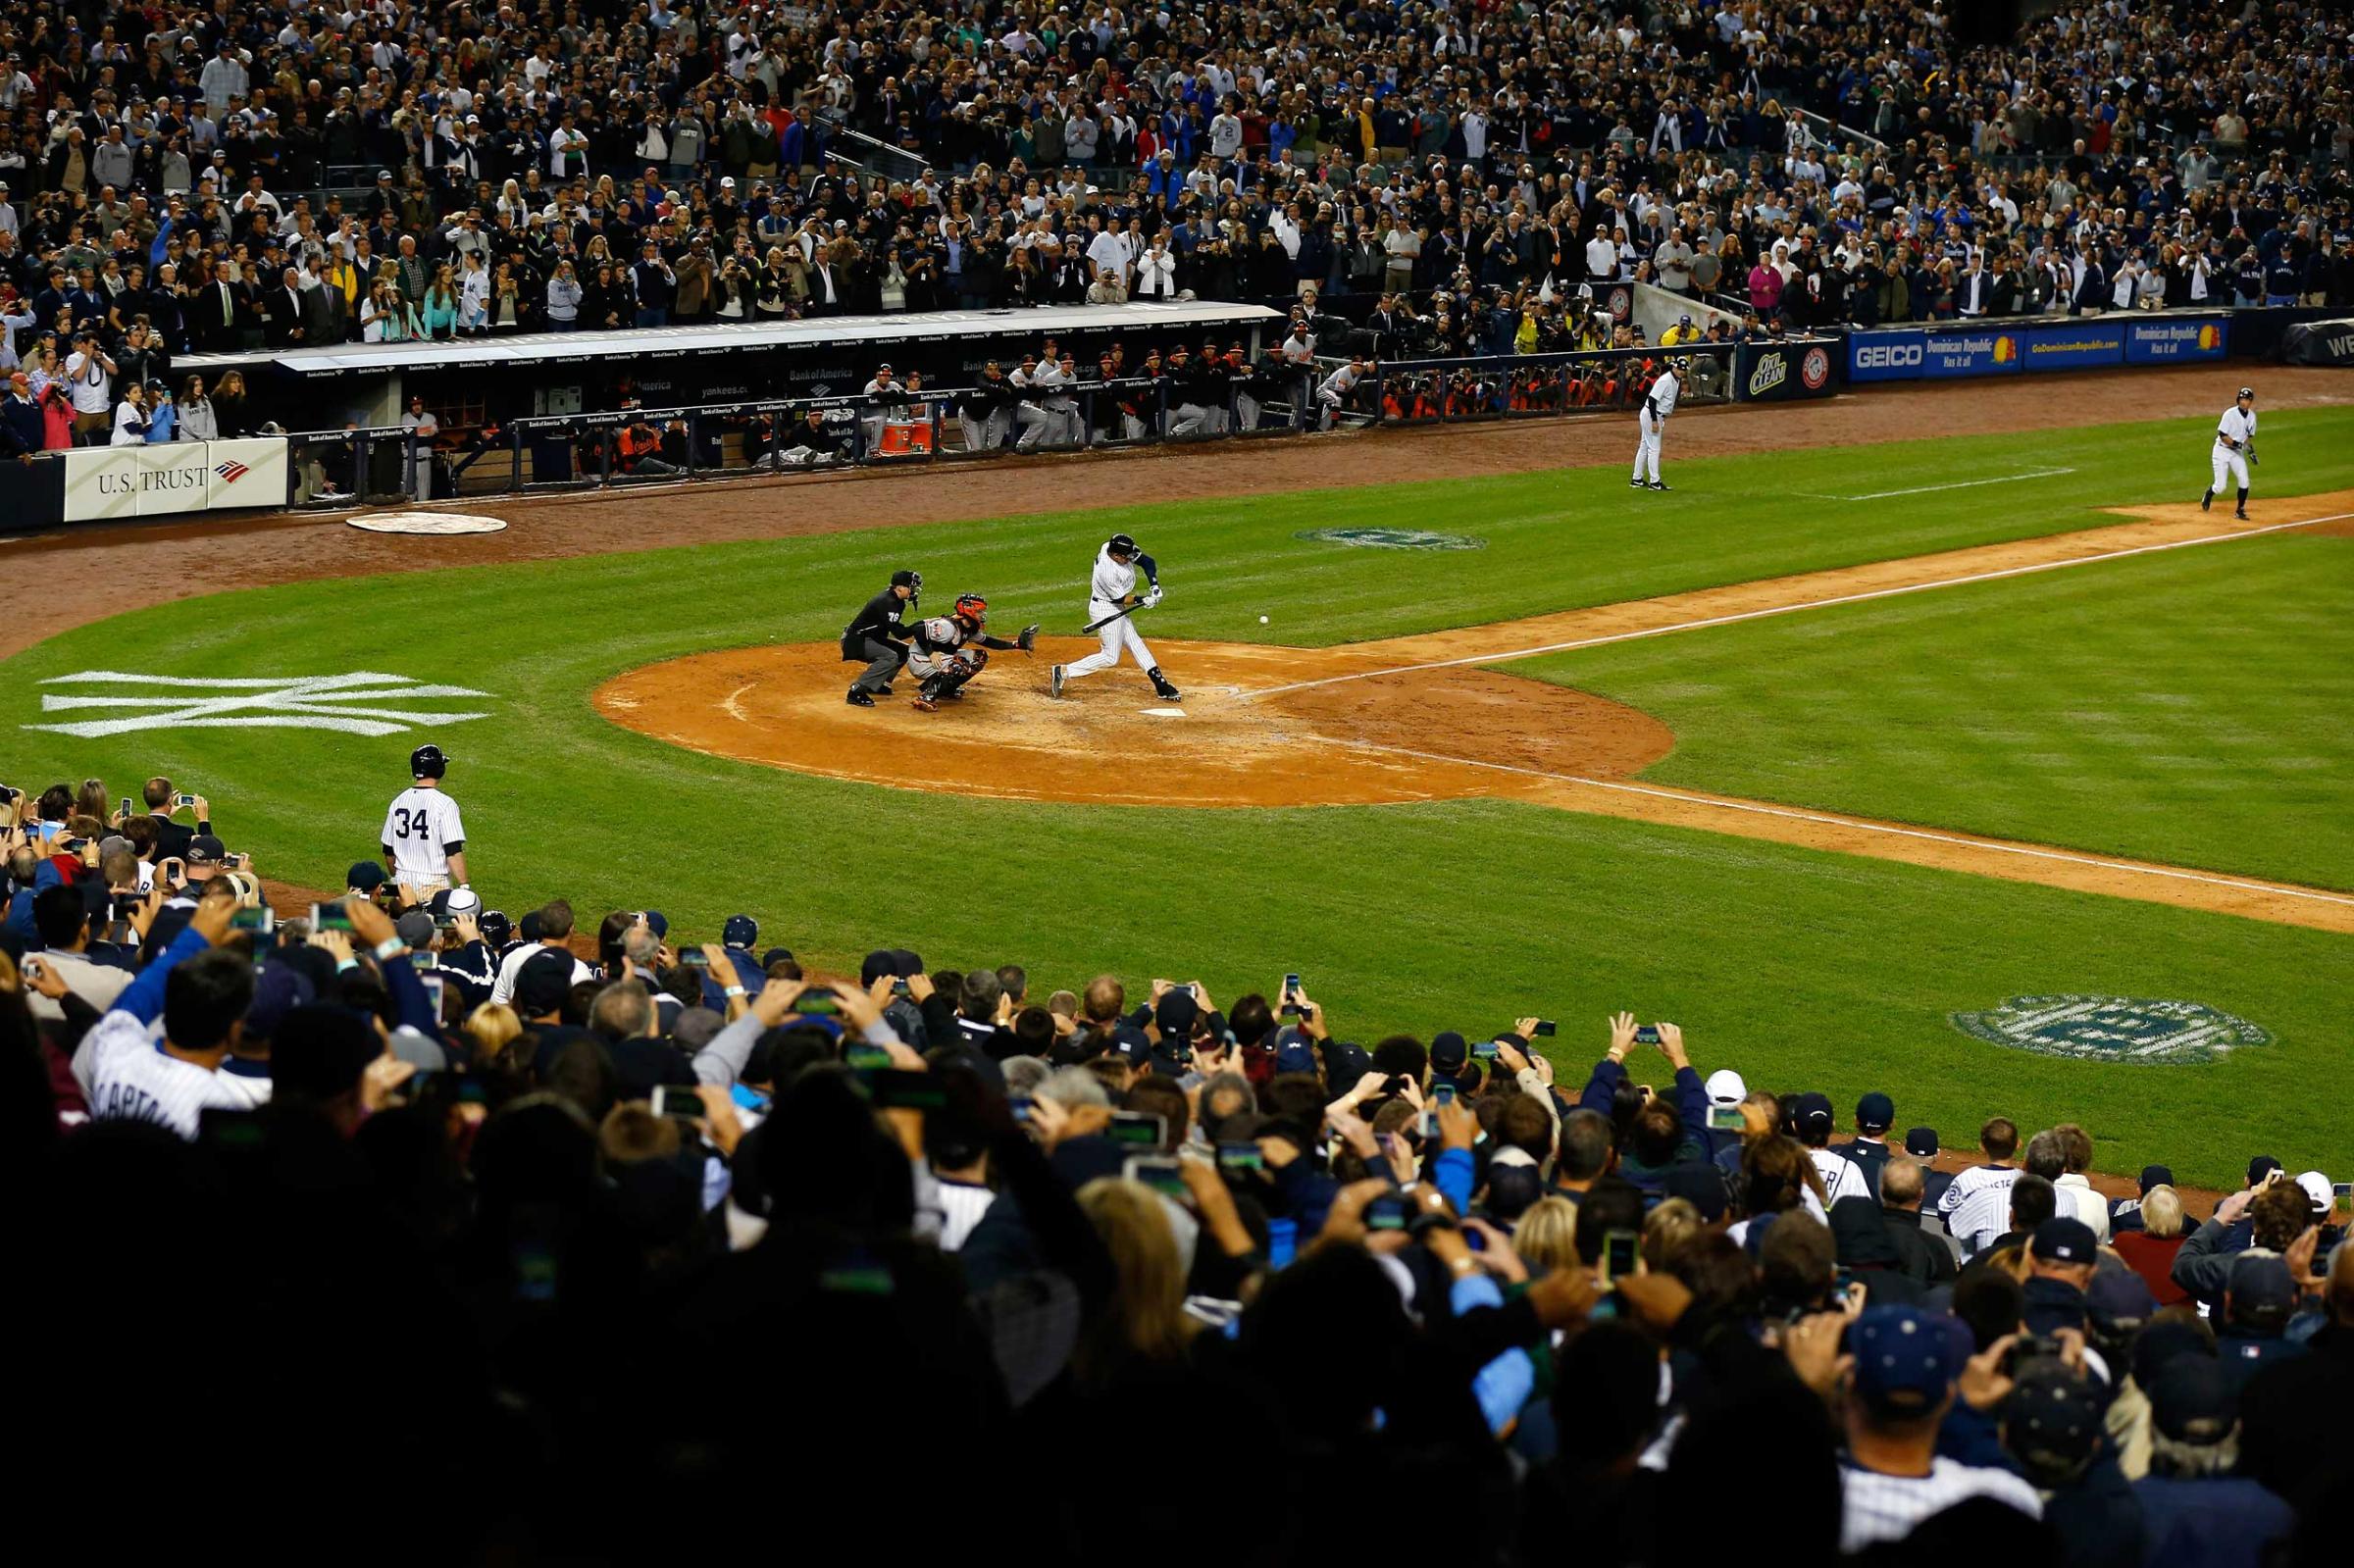 Derek Jeter hits a game winning RBI hit in the ninth inning against the Baltimore Orioles in his last game ever at Yankee Stadium on Sept. 25, 2014.